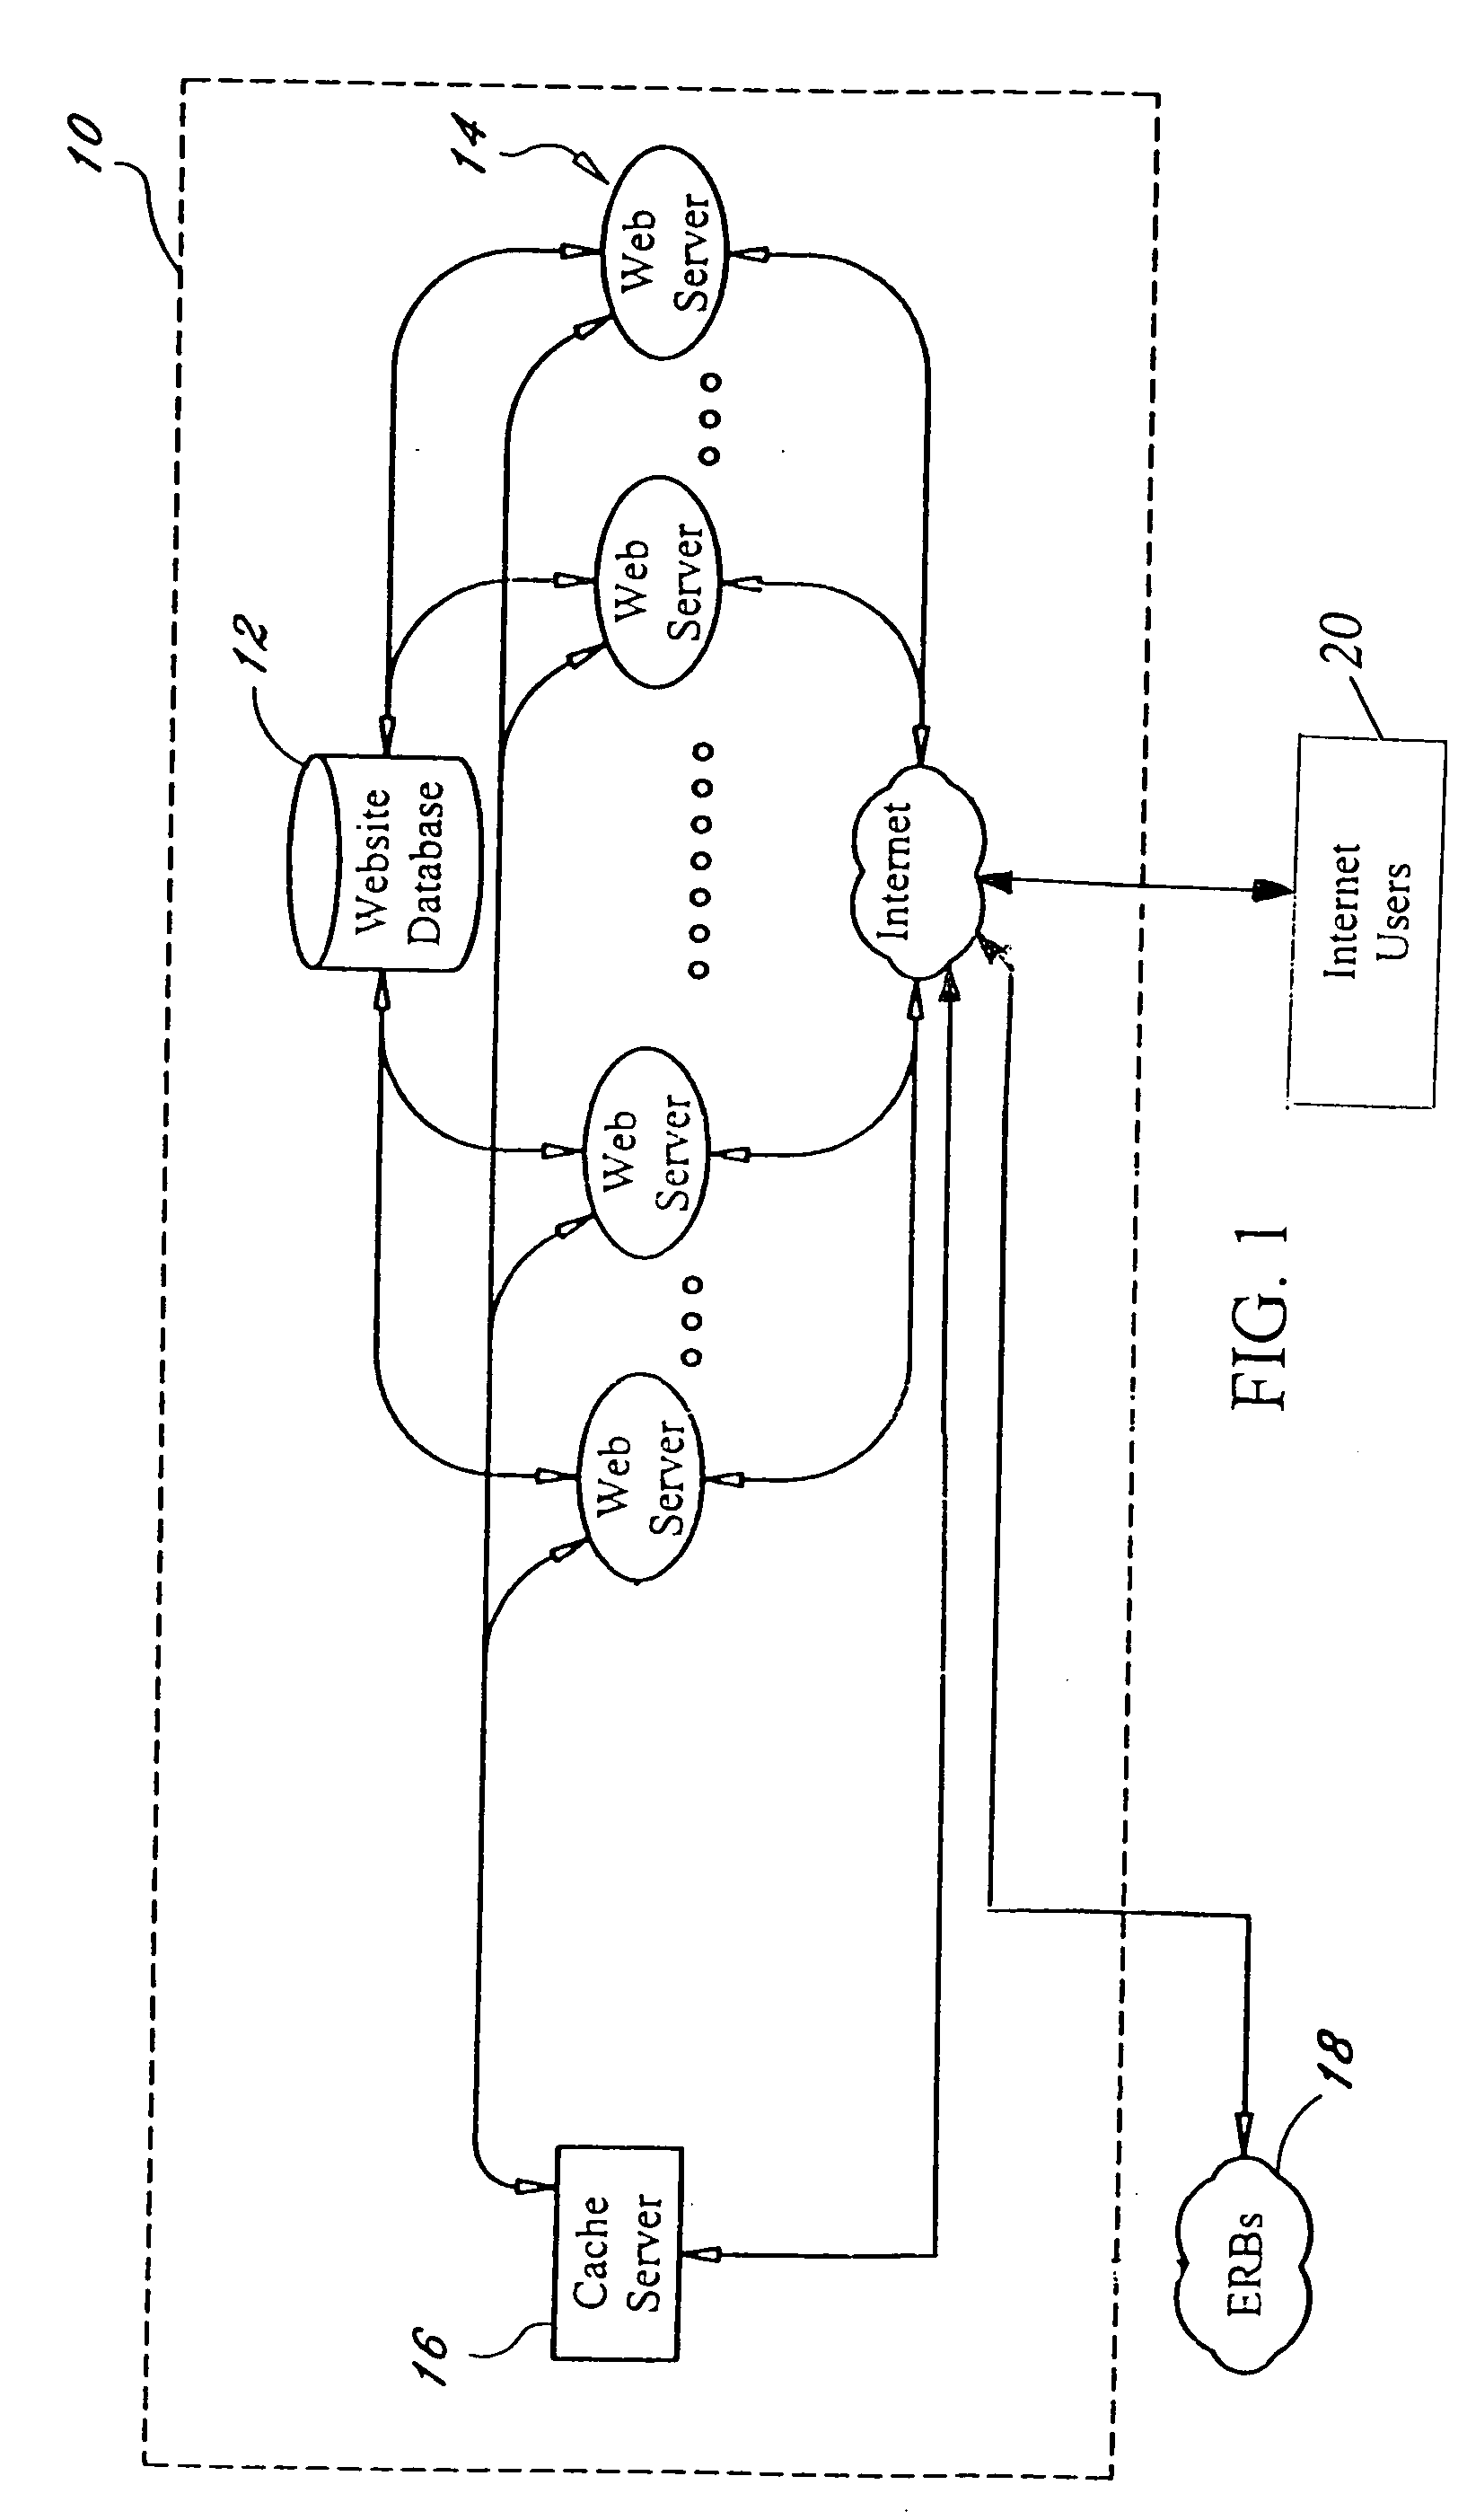 System and method of caching inventory information in a network